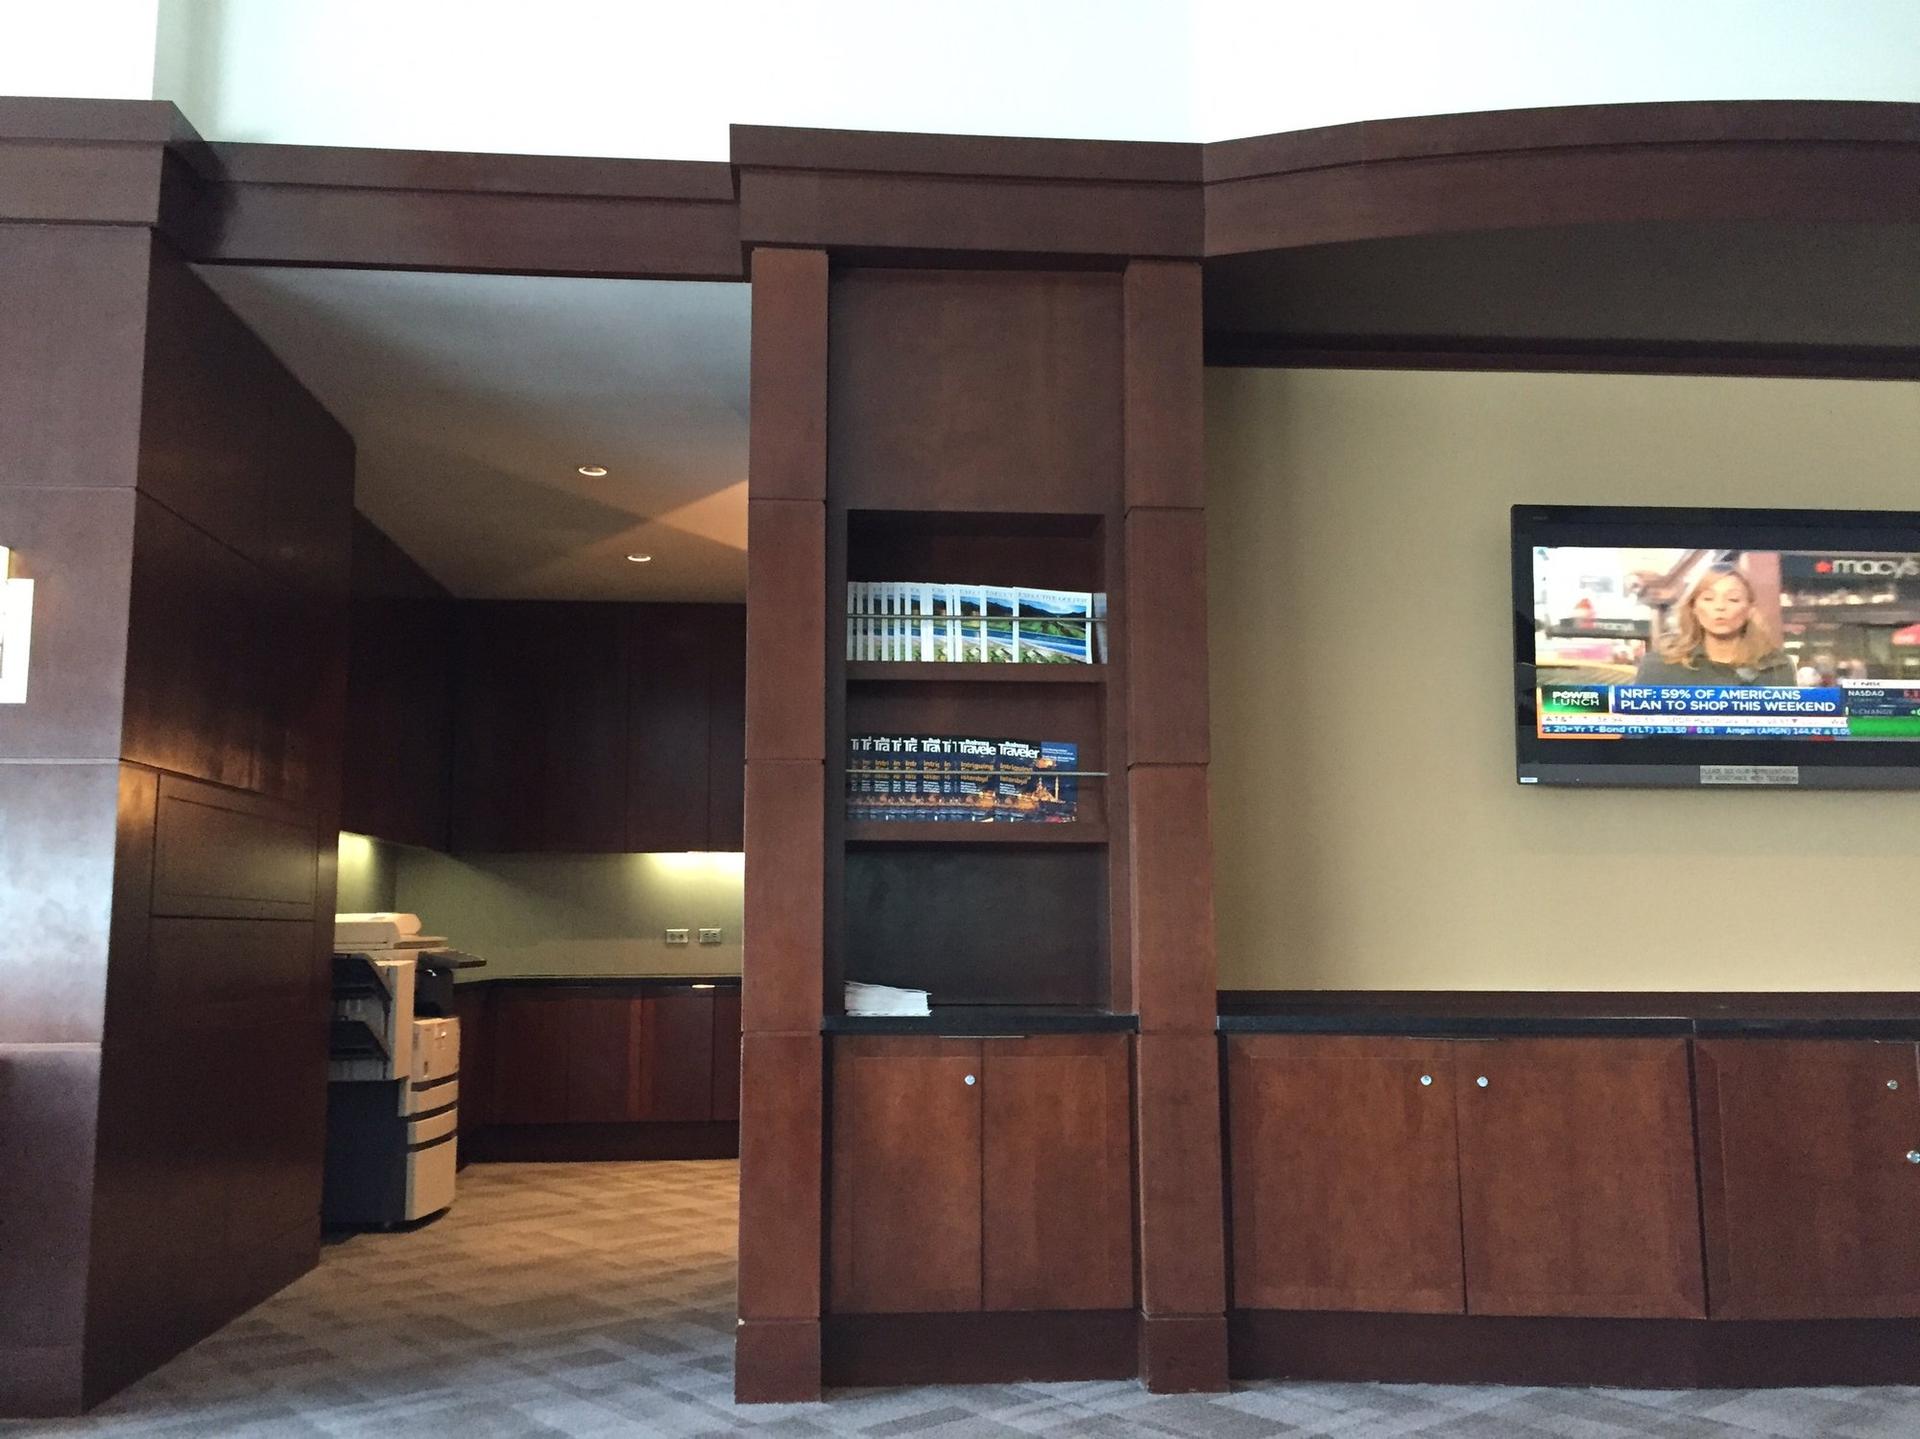 American Airlines Admirals Club image 32 of 37